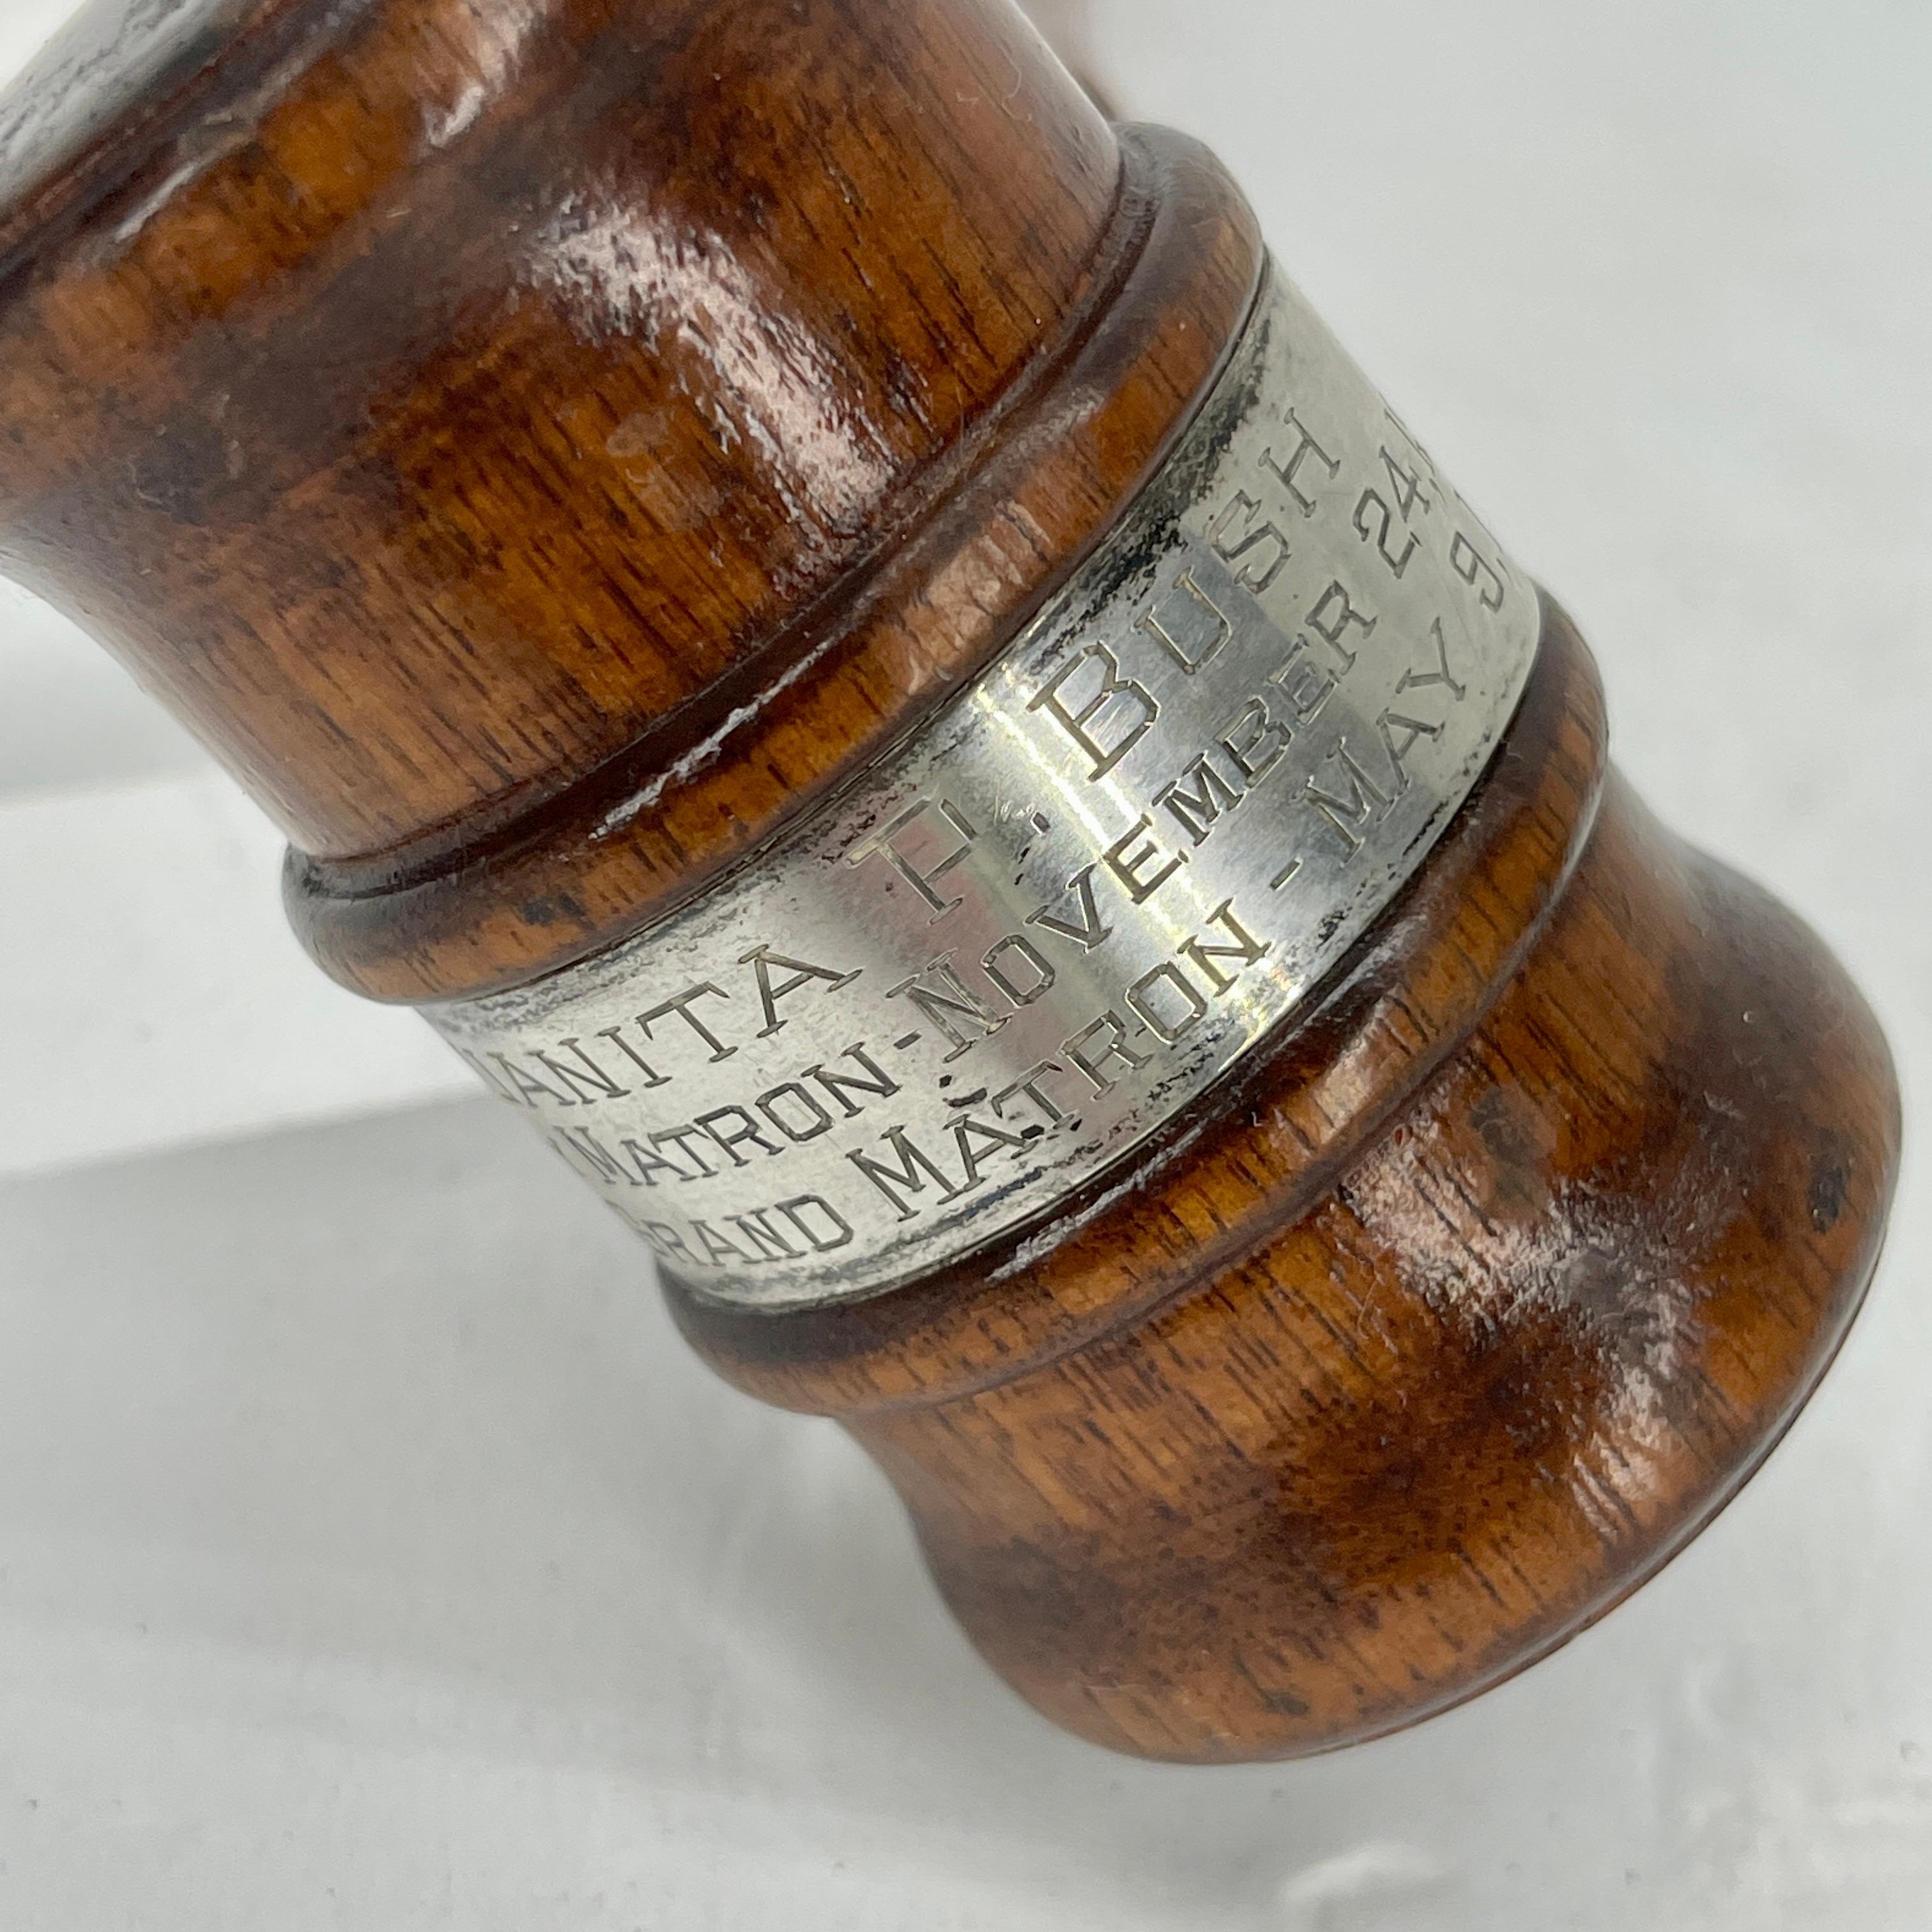 Antique sterling silver and wood gavel or auction hammer. 
The gavel is engraved with Judge's name and is a commemorative hammer or gavel for the years of service of the judge. The walnut wood is in good condition and the sterling silver engraved